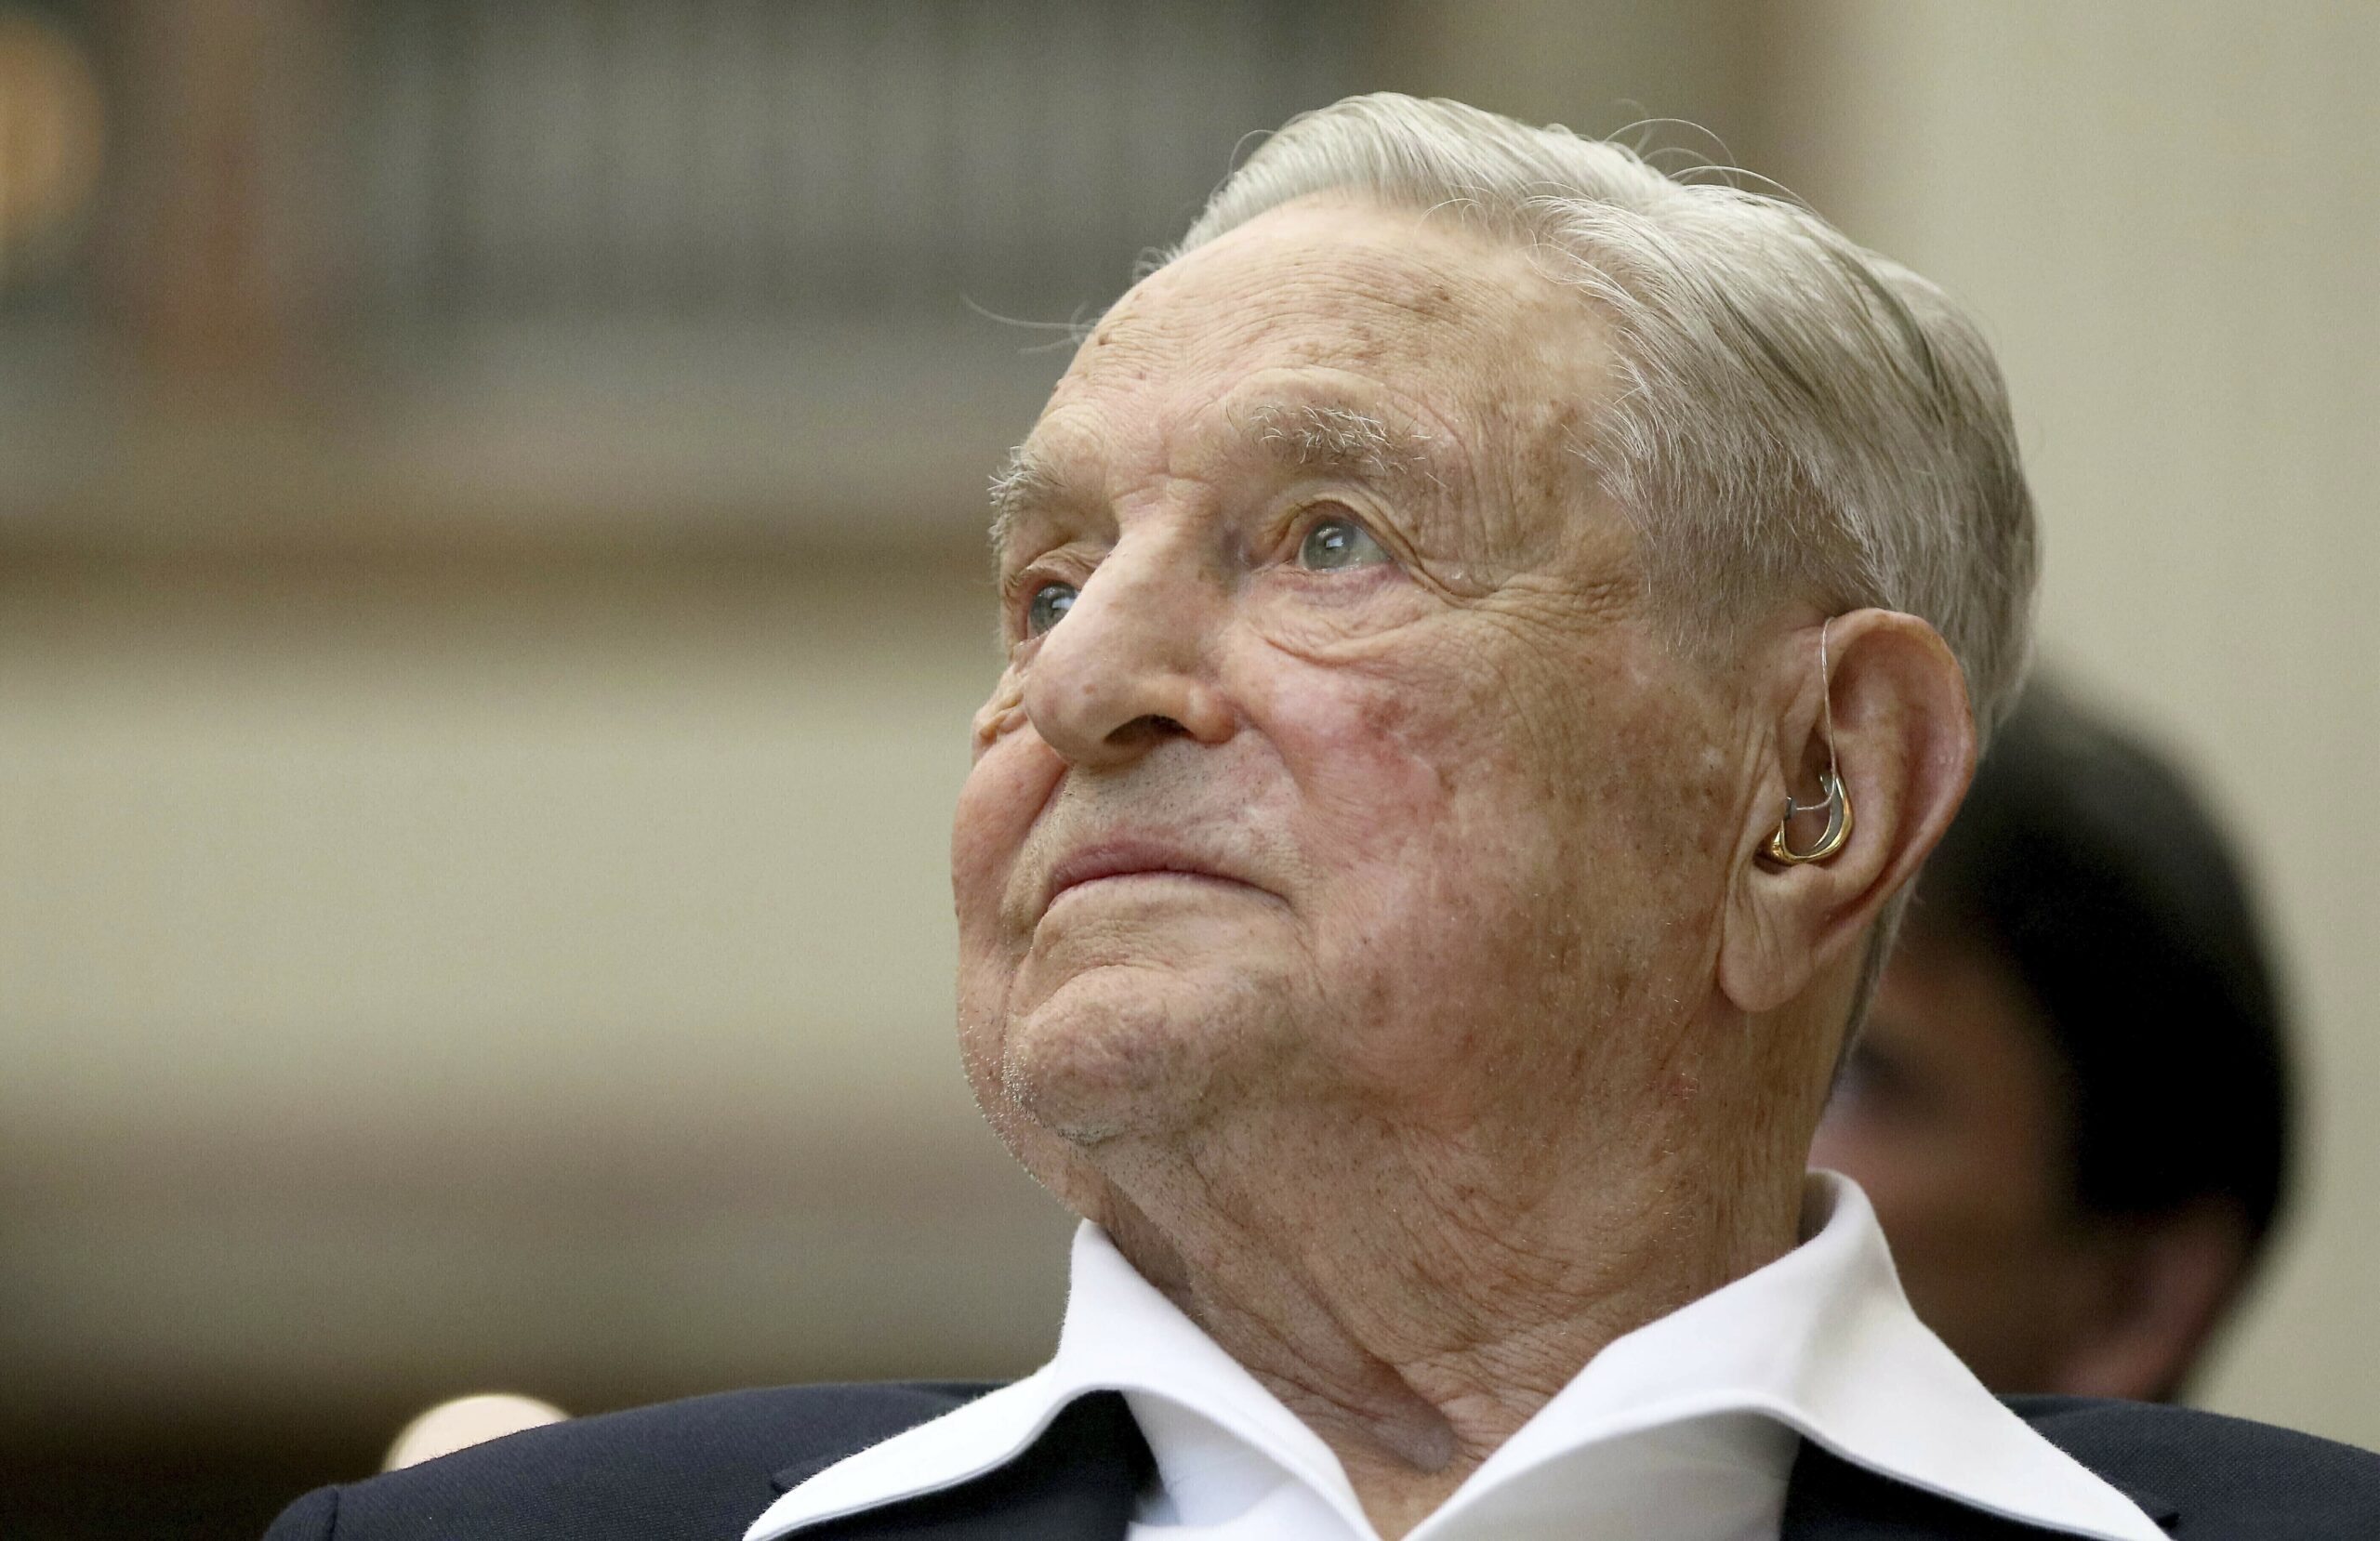 Fox News Is Trying to Prove Soros Ties to Smartmatic as Part of Defense Against Defamation Suit